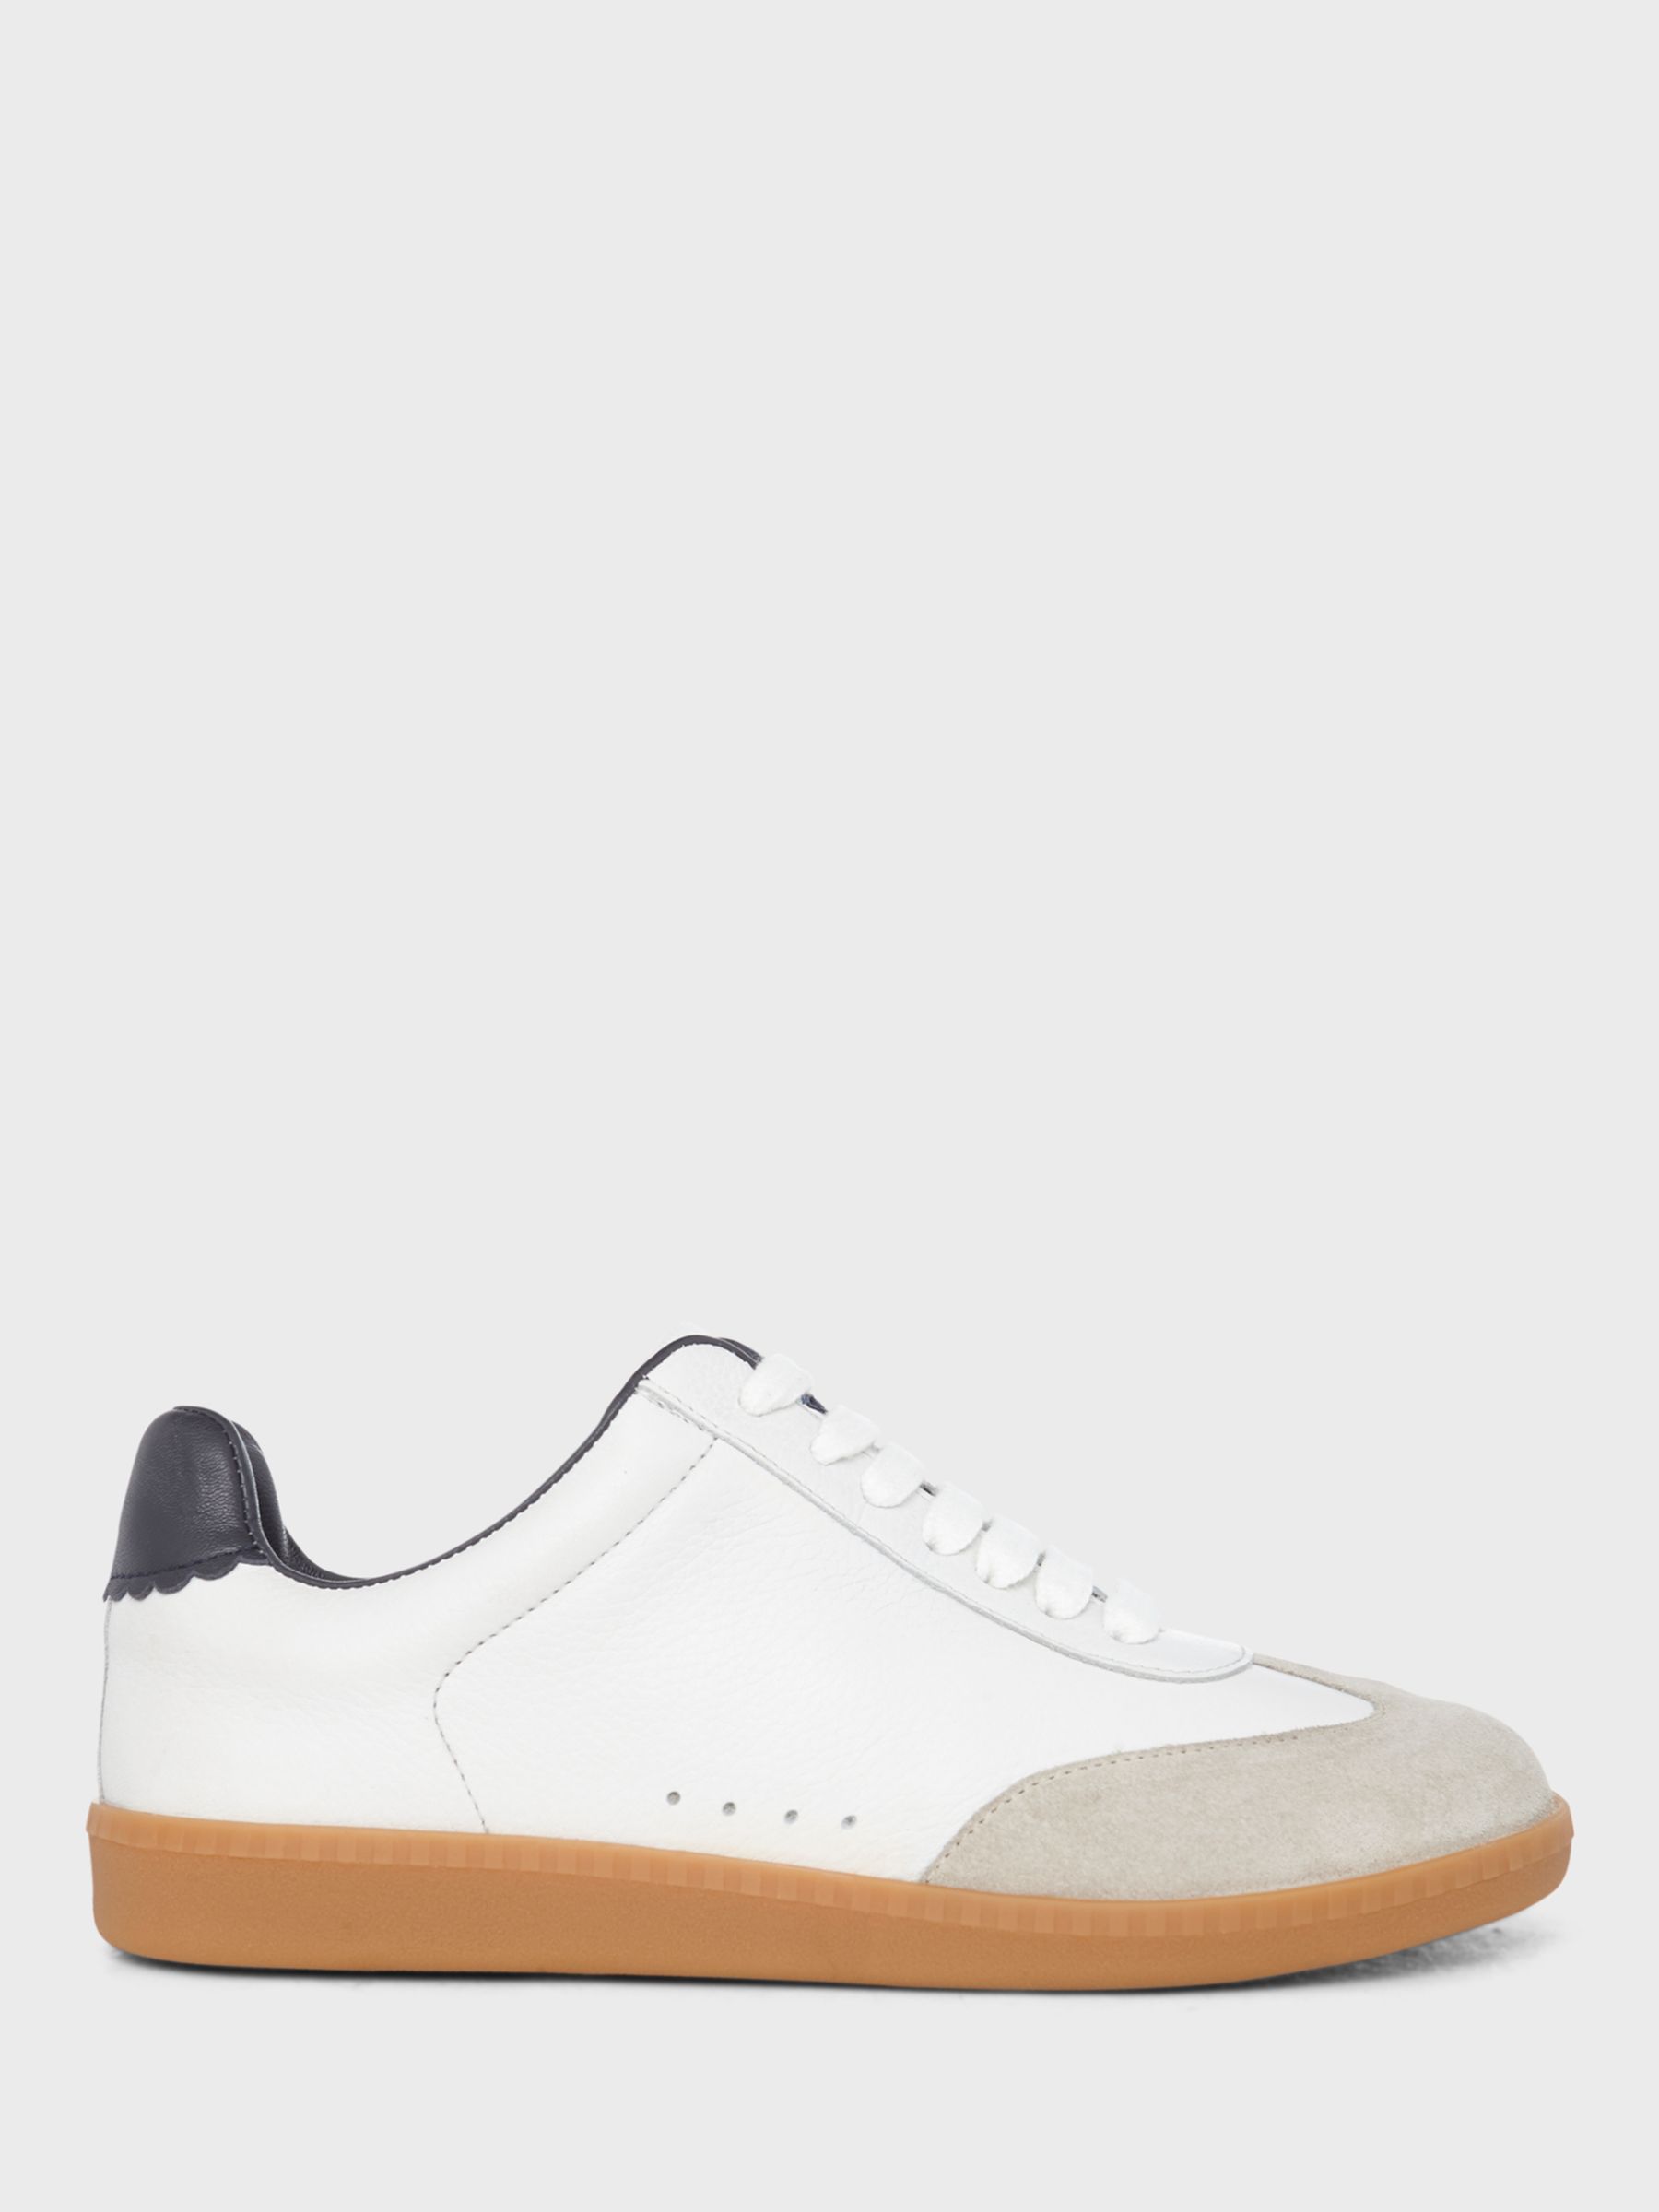 Hobbs Madden Leather Trainers, White/Navy at John Lewis & Partners